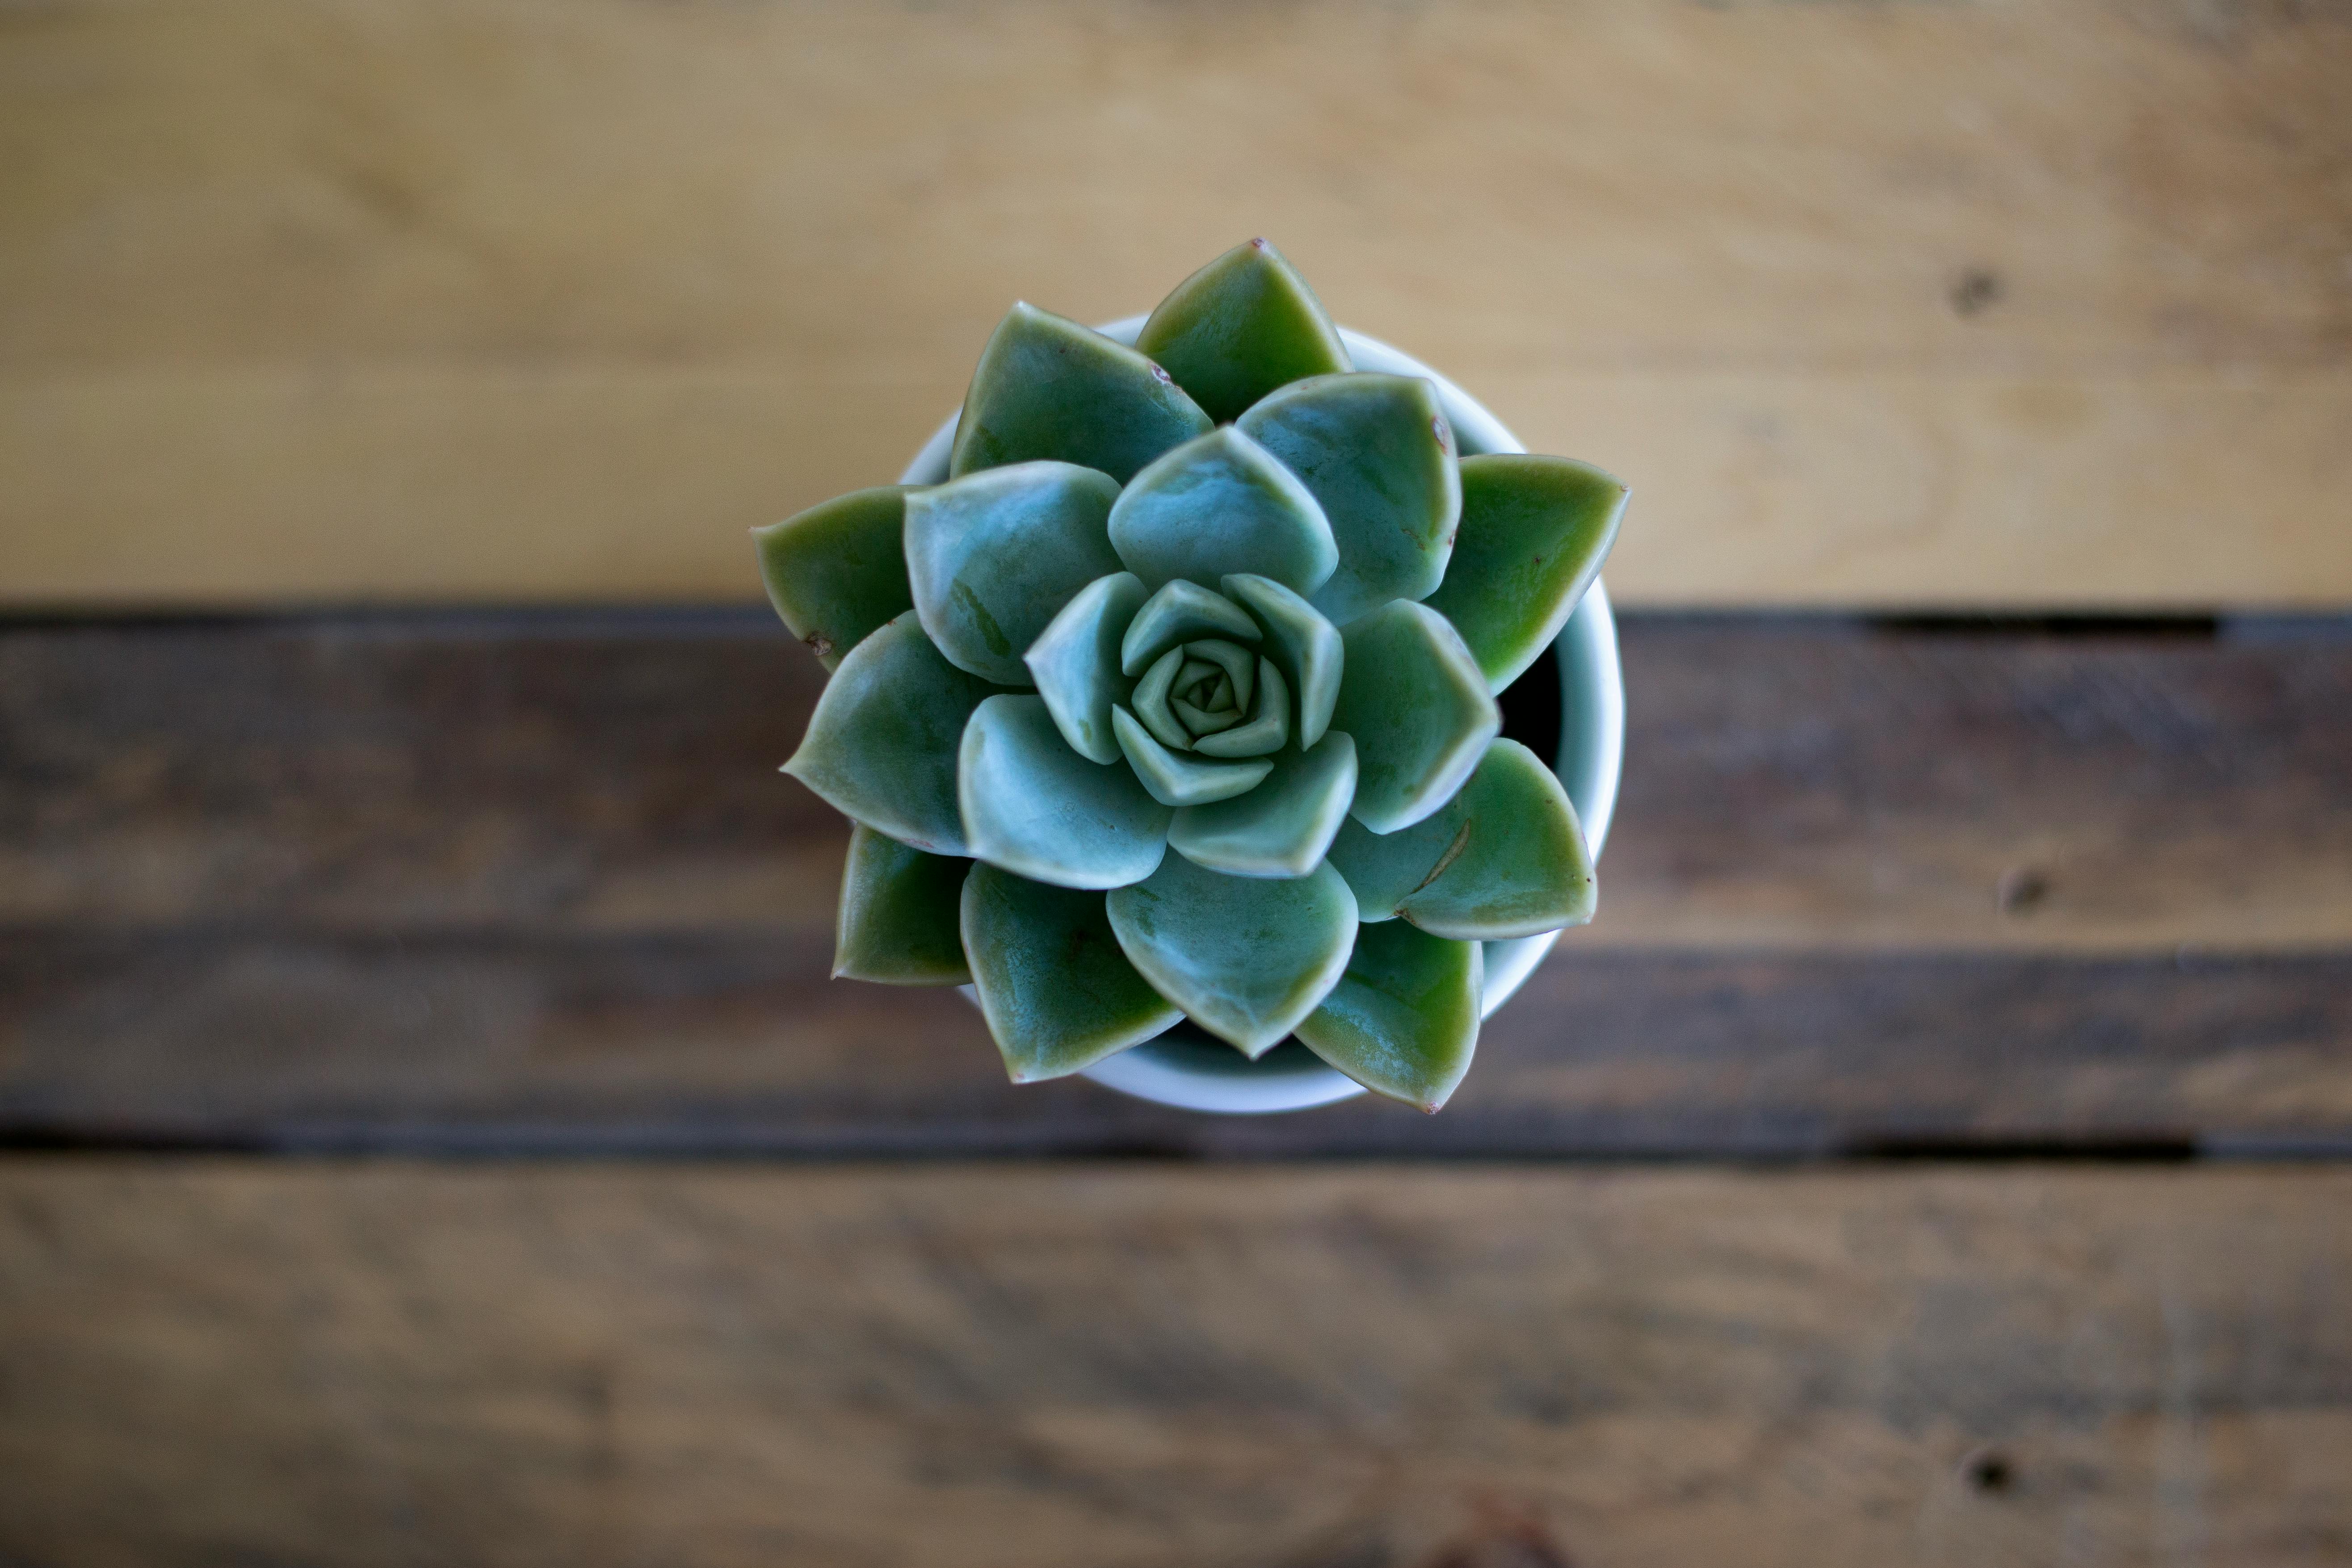 Succulent Plant Images  Free Photos PNG Stickers Wallpapers  Backgrounds   rawpixel